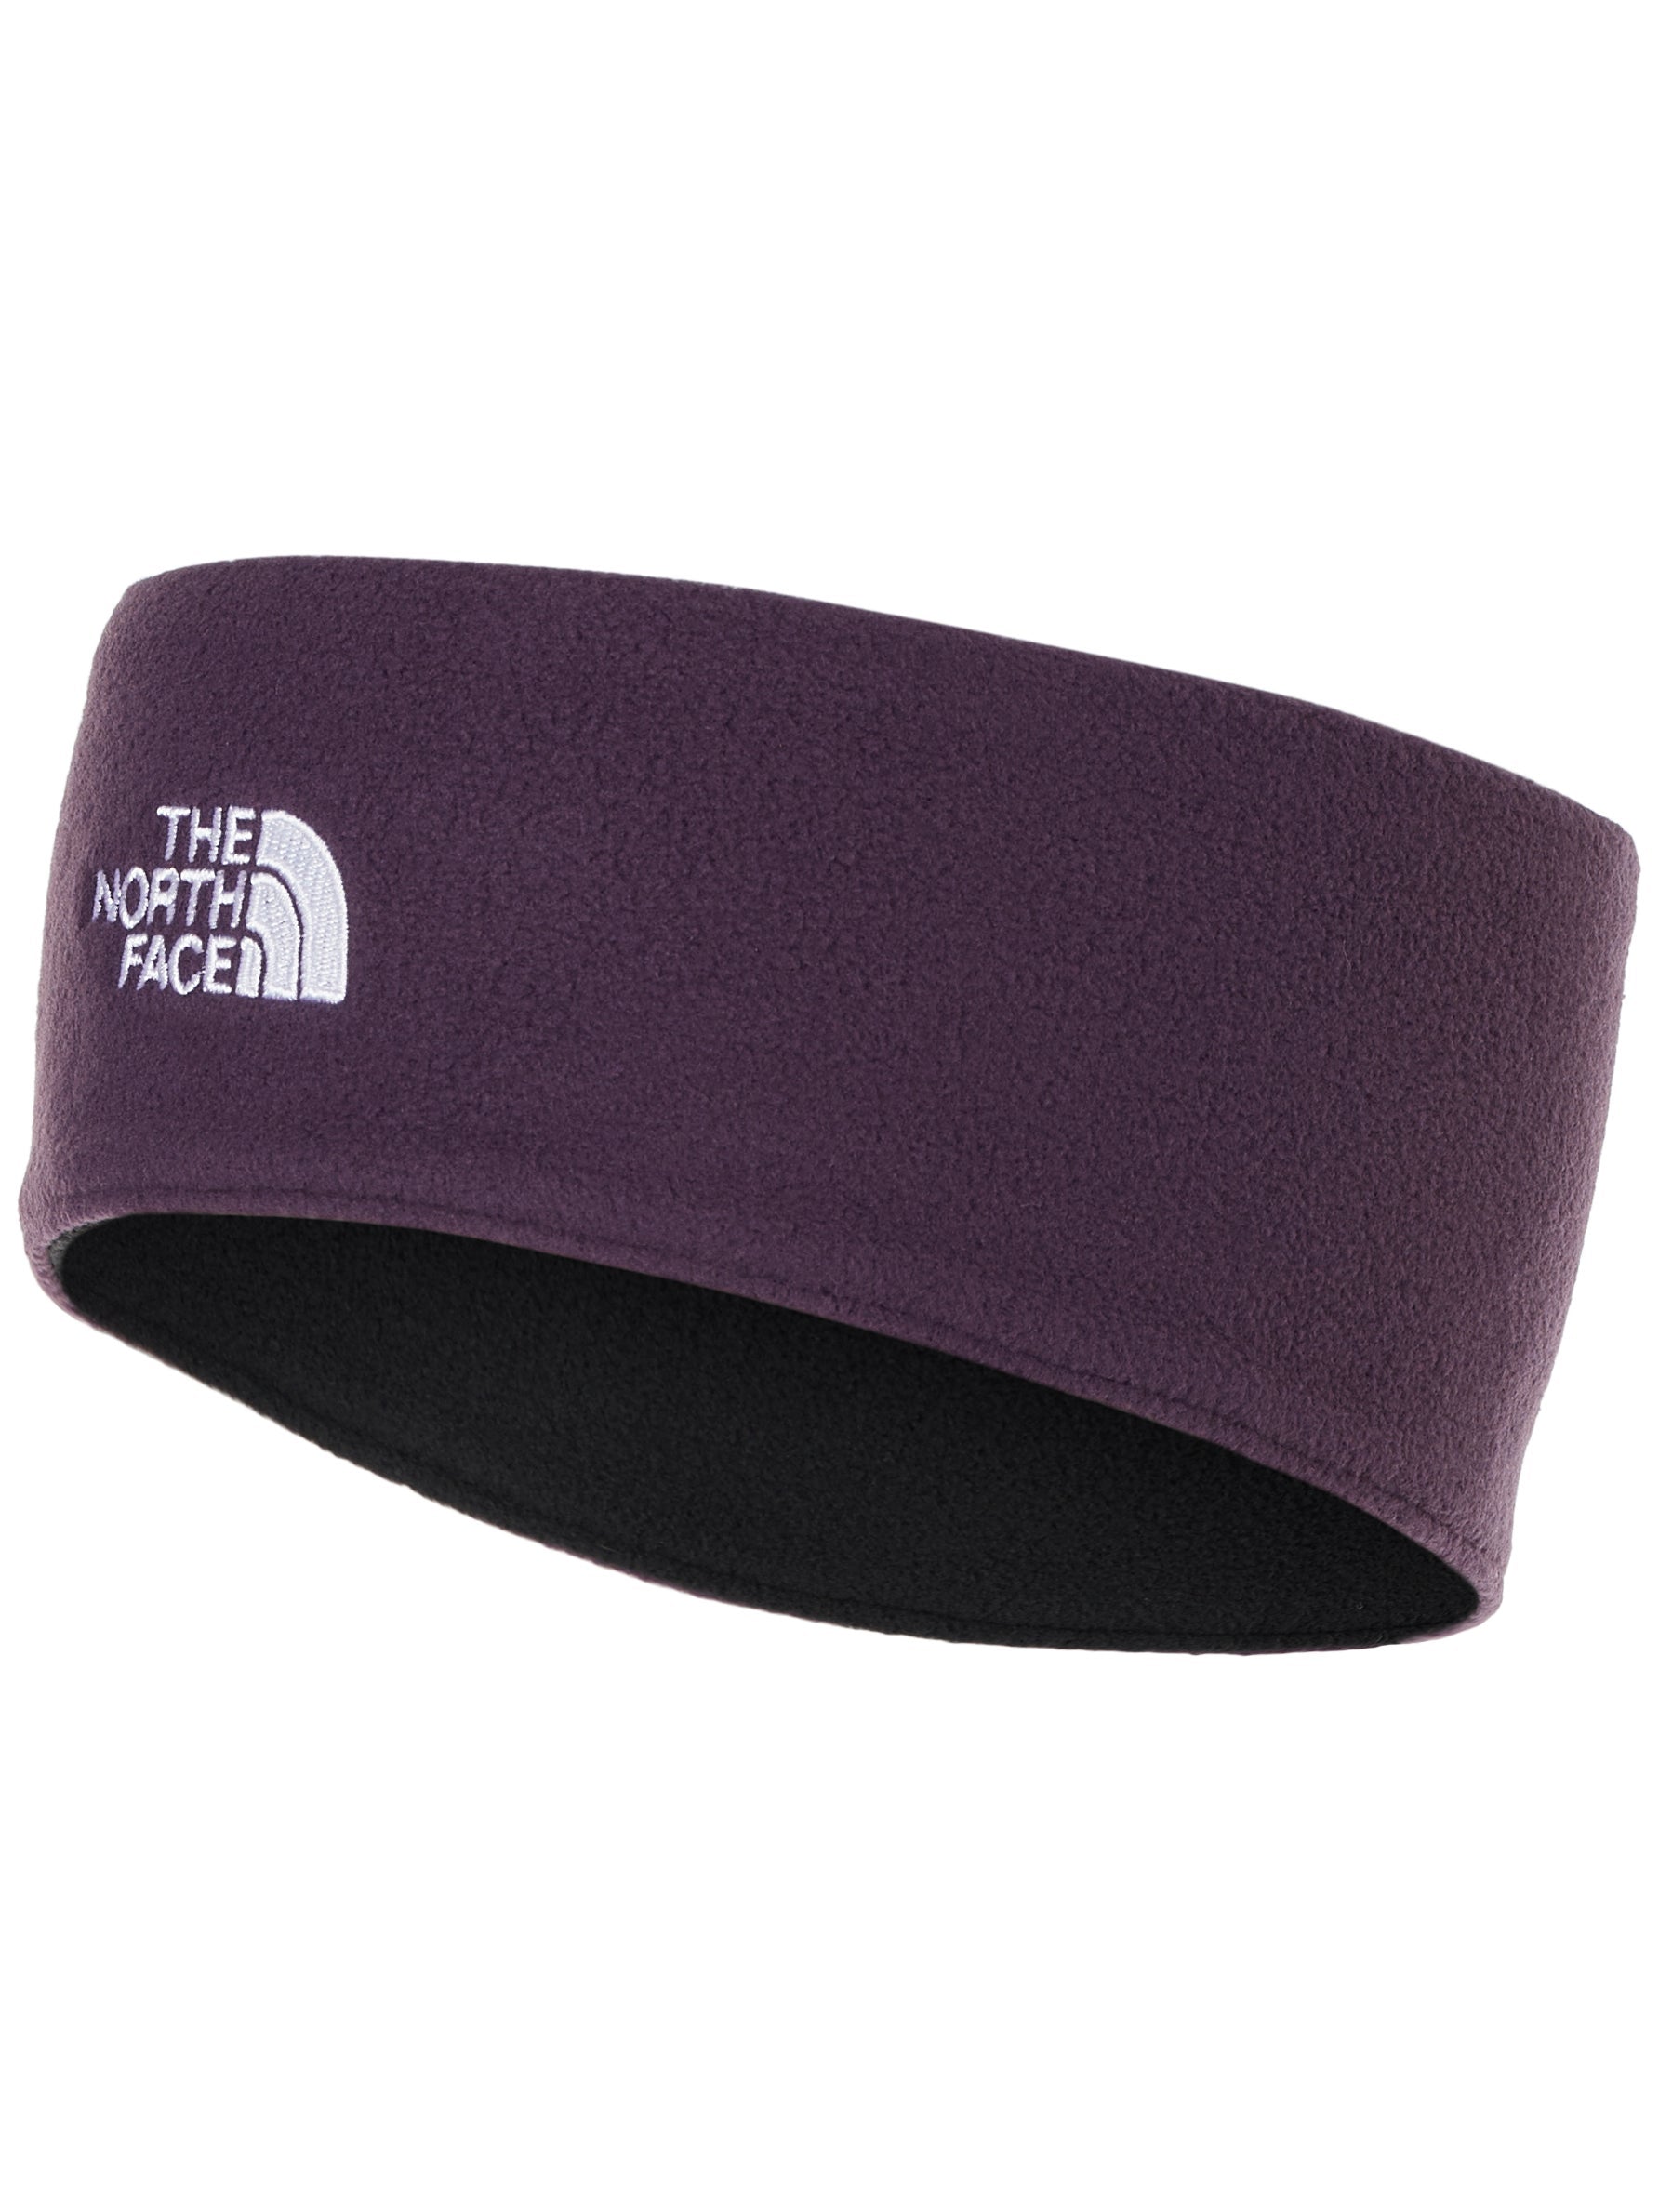 NORTH FACE STANDARD ISSUE EARBAND